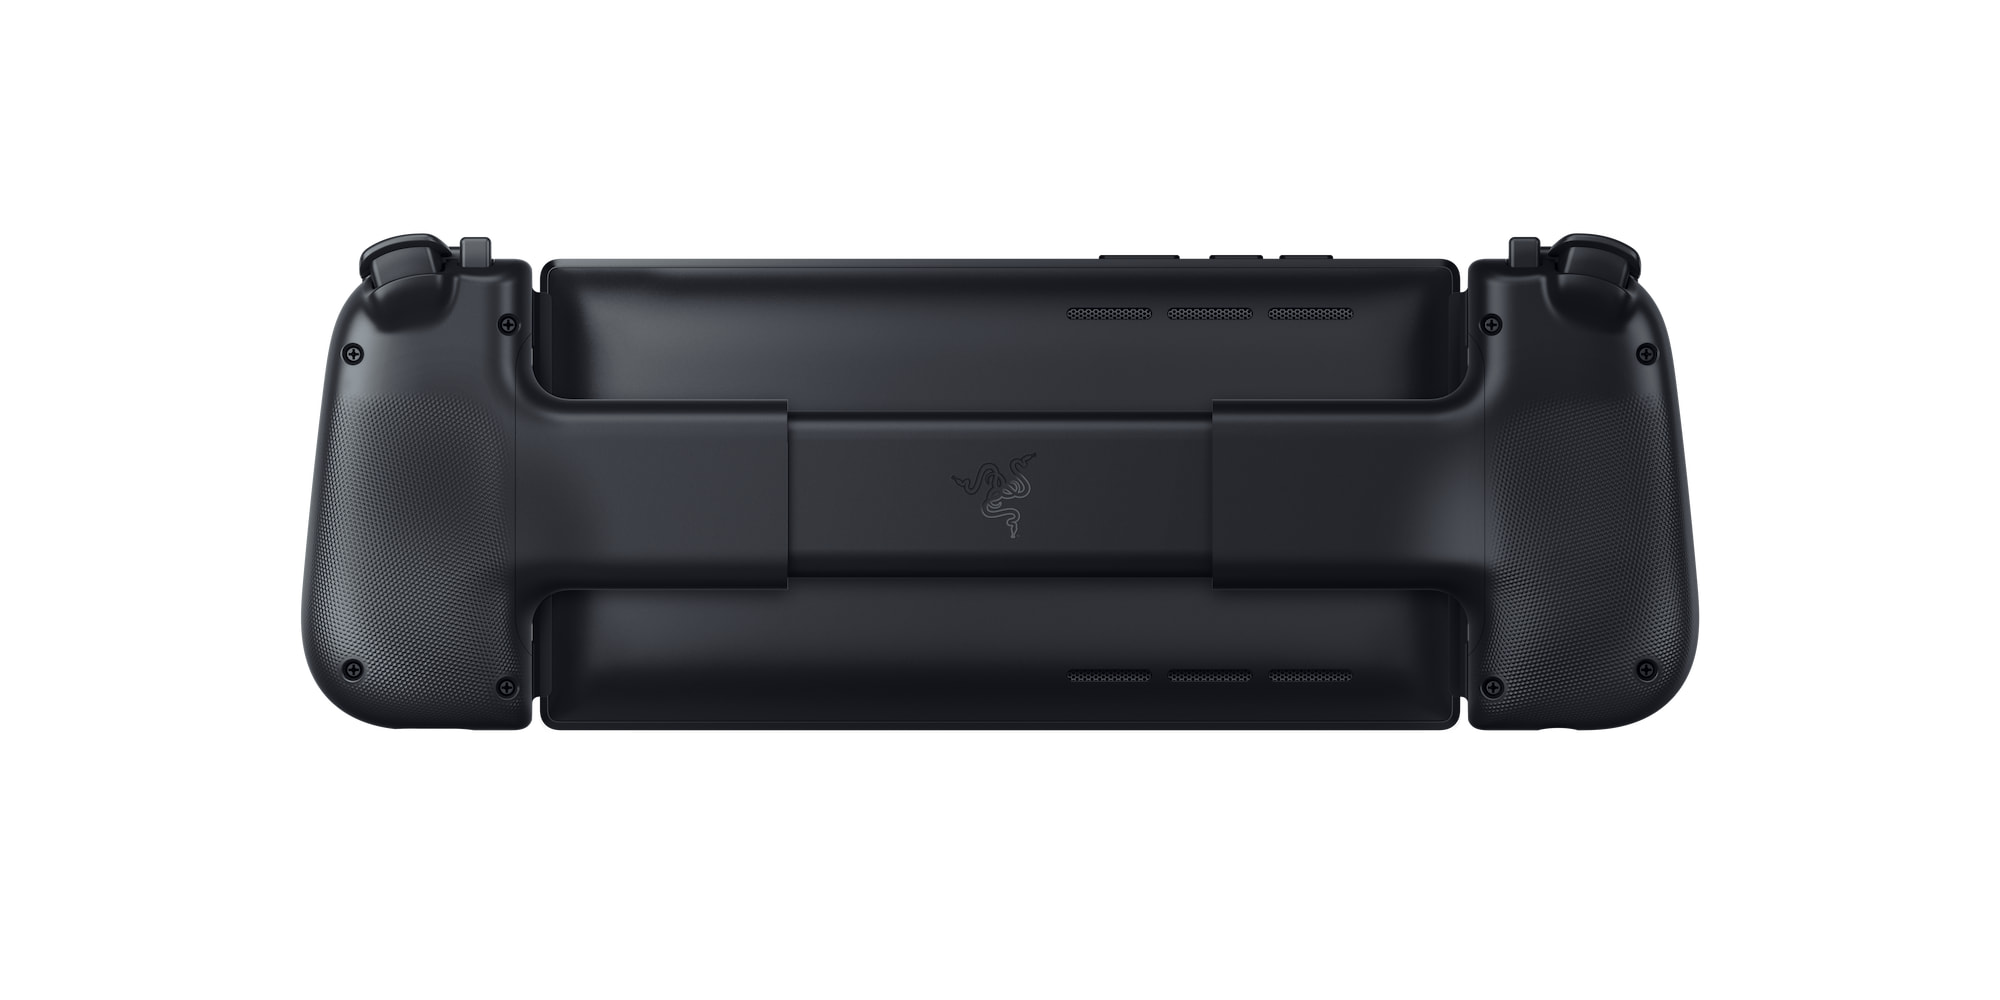 Razer Edge Android gaming tablet w/ detachable controller, $399